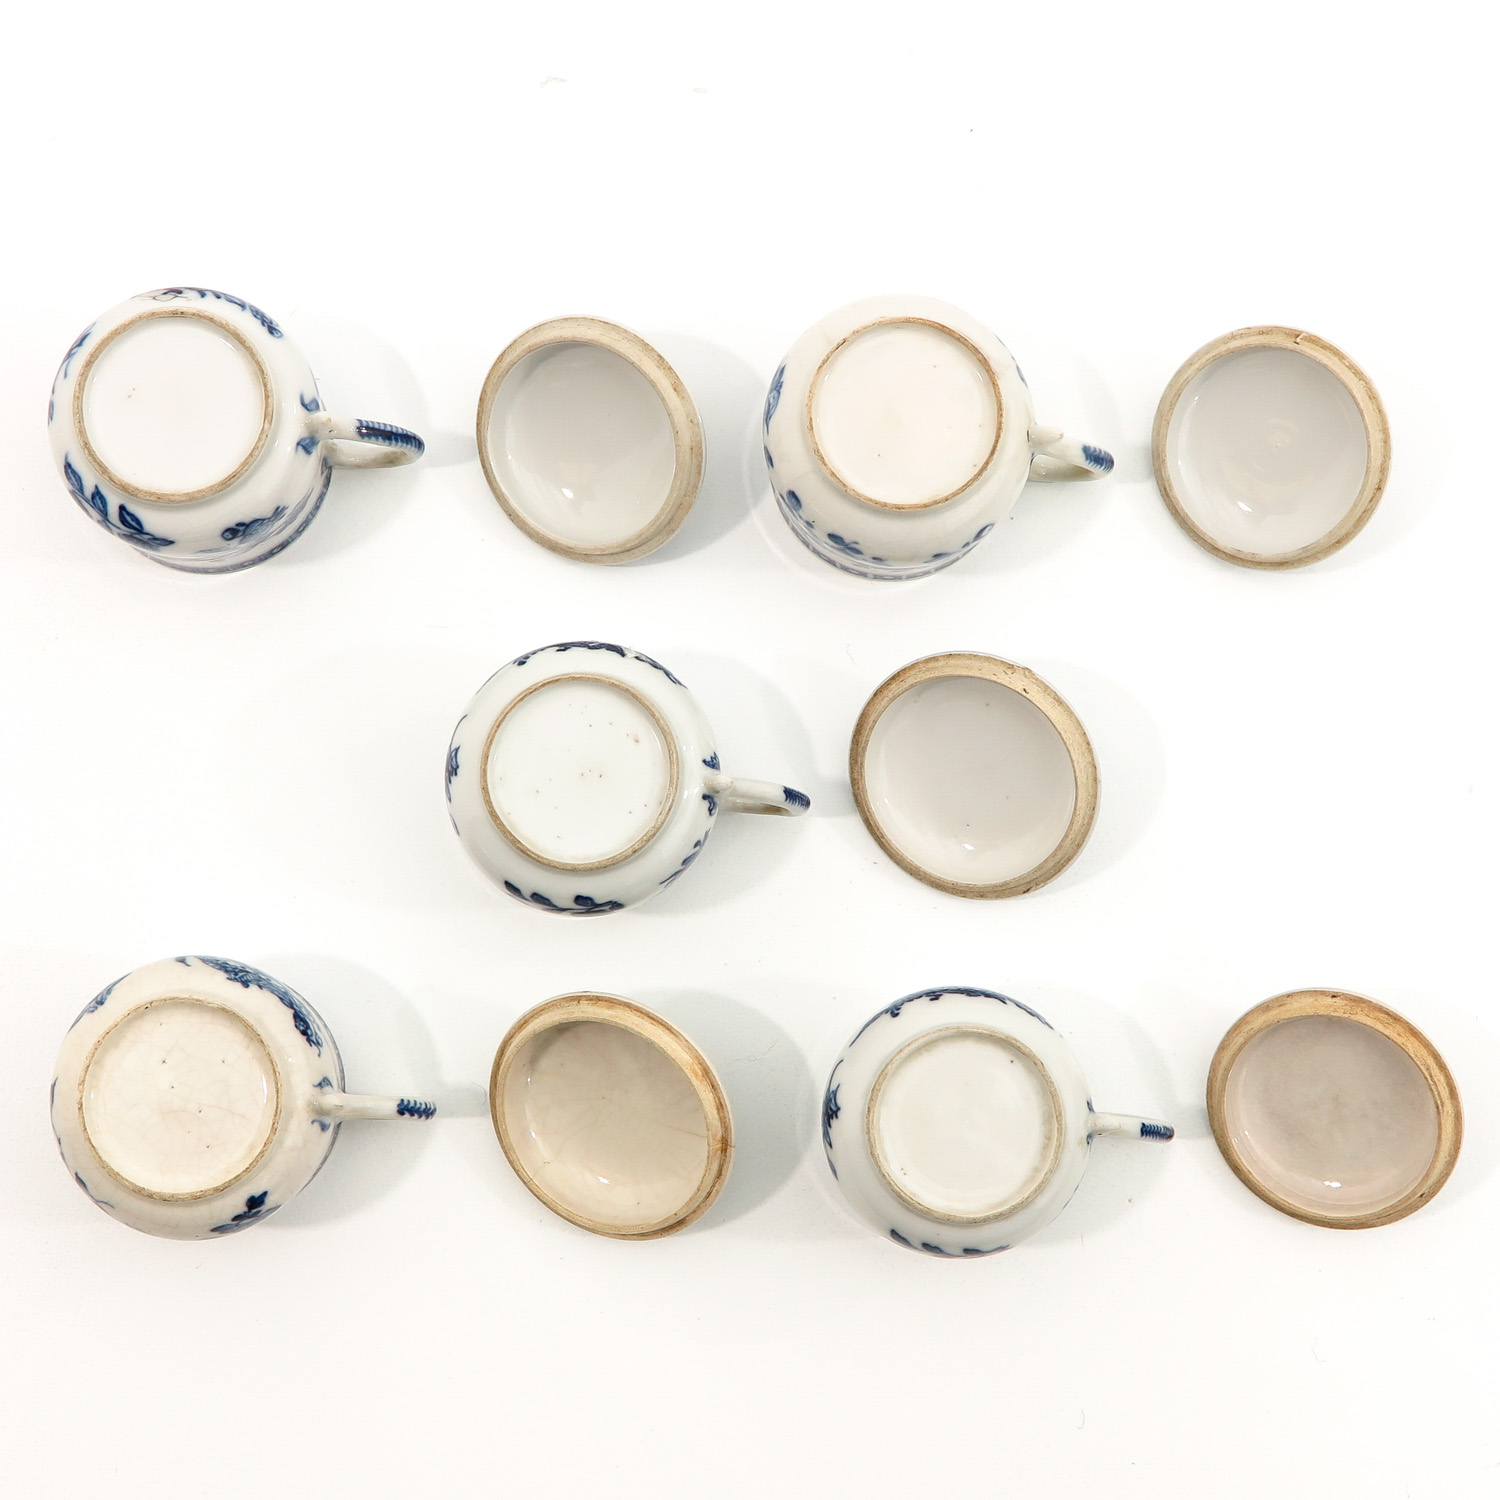 A Set of 5 Covered Cups - Image 6 of 9